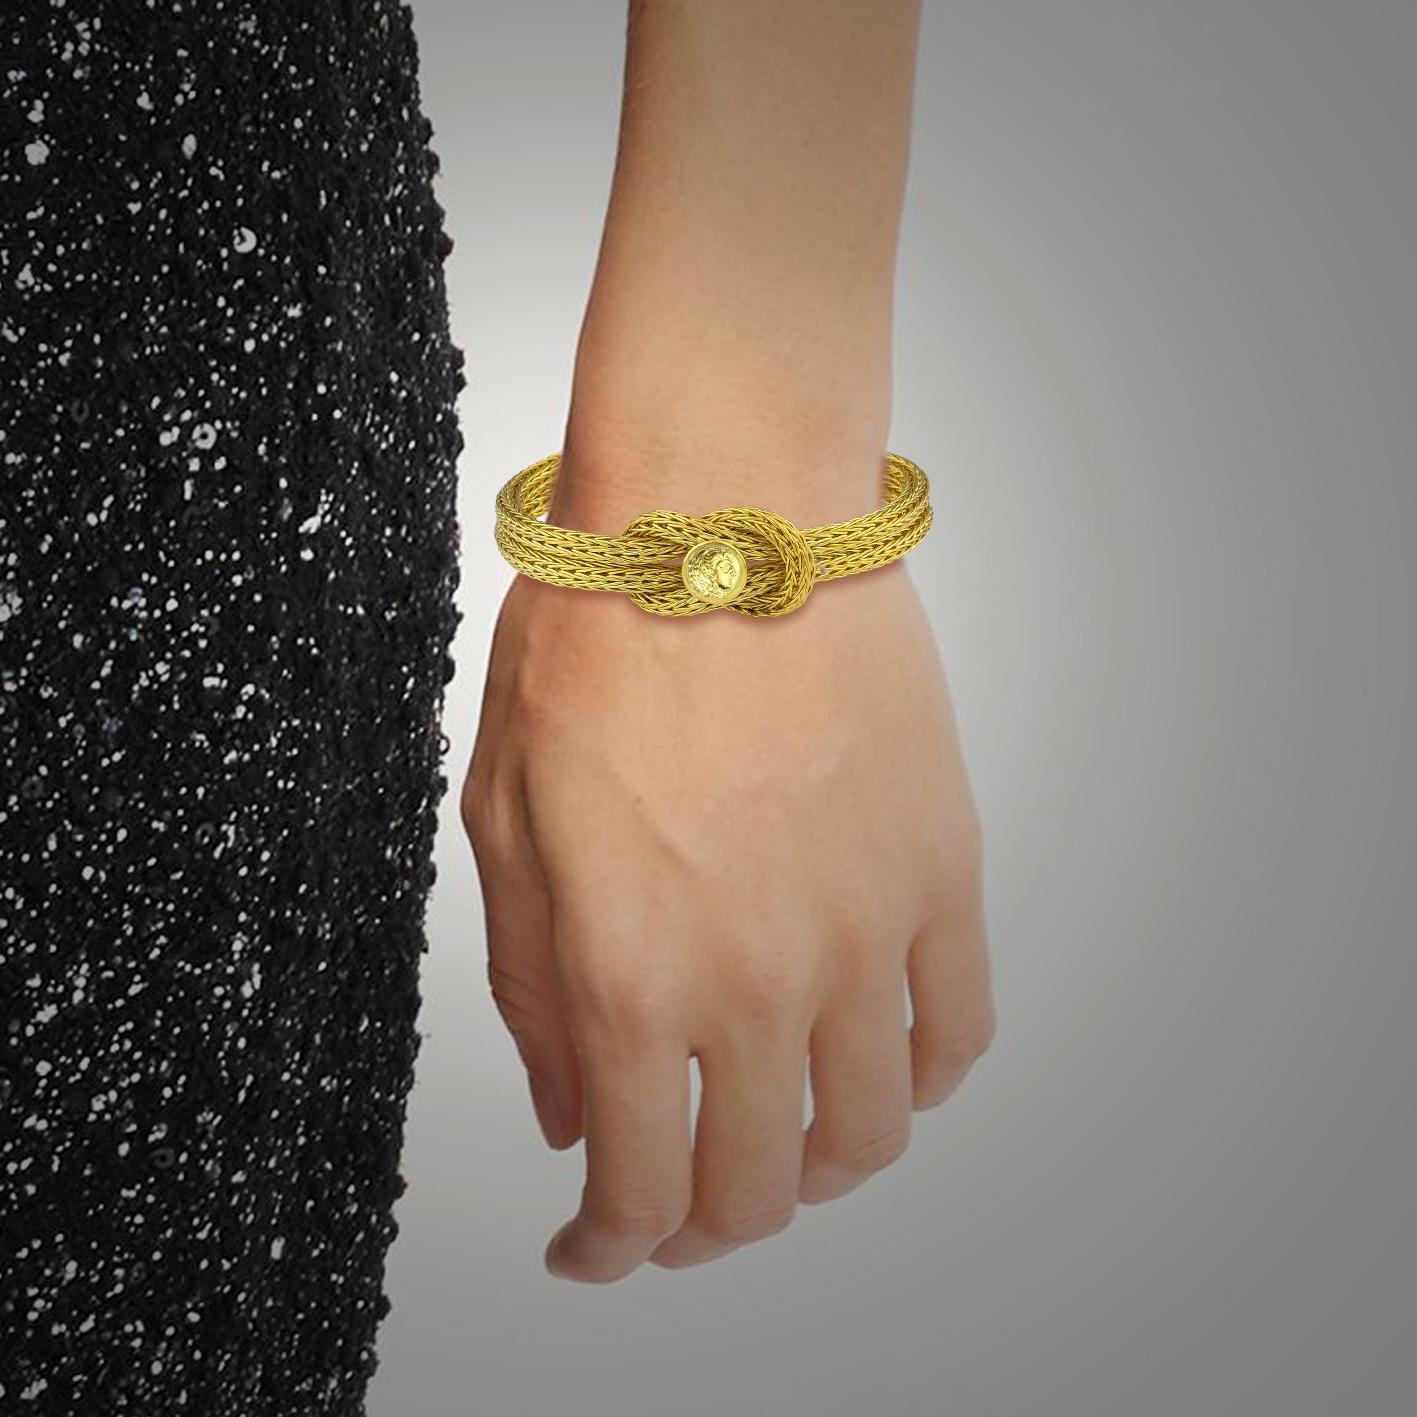 S.Georgios designer bracelet handknitted in our workshop in Greece from 18 Karat yellow gold threads. This flexible bracelet decorates Hercules Knot, the symbol of strength, healing and protection, and a replica of Alexander The Great coin. Bracelet